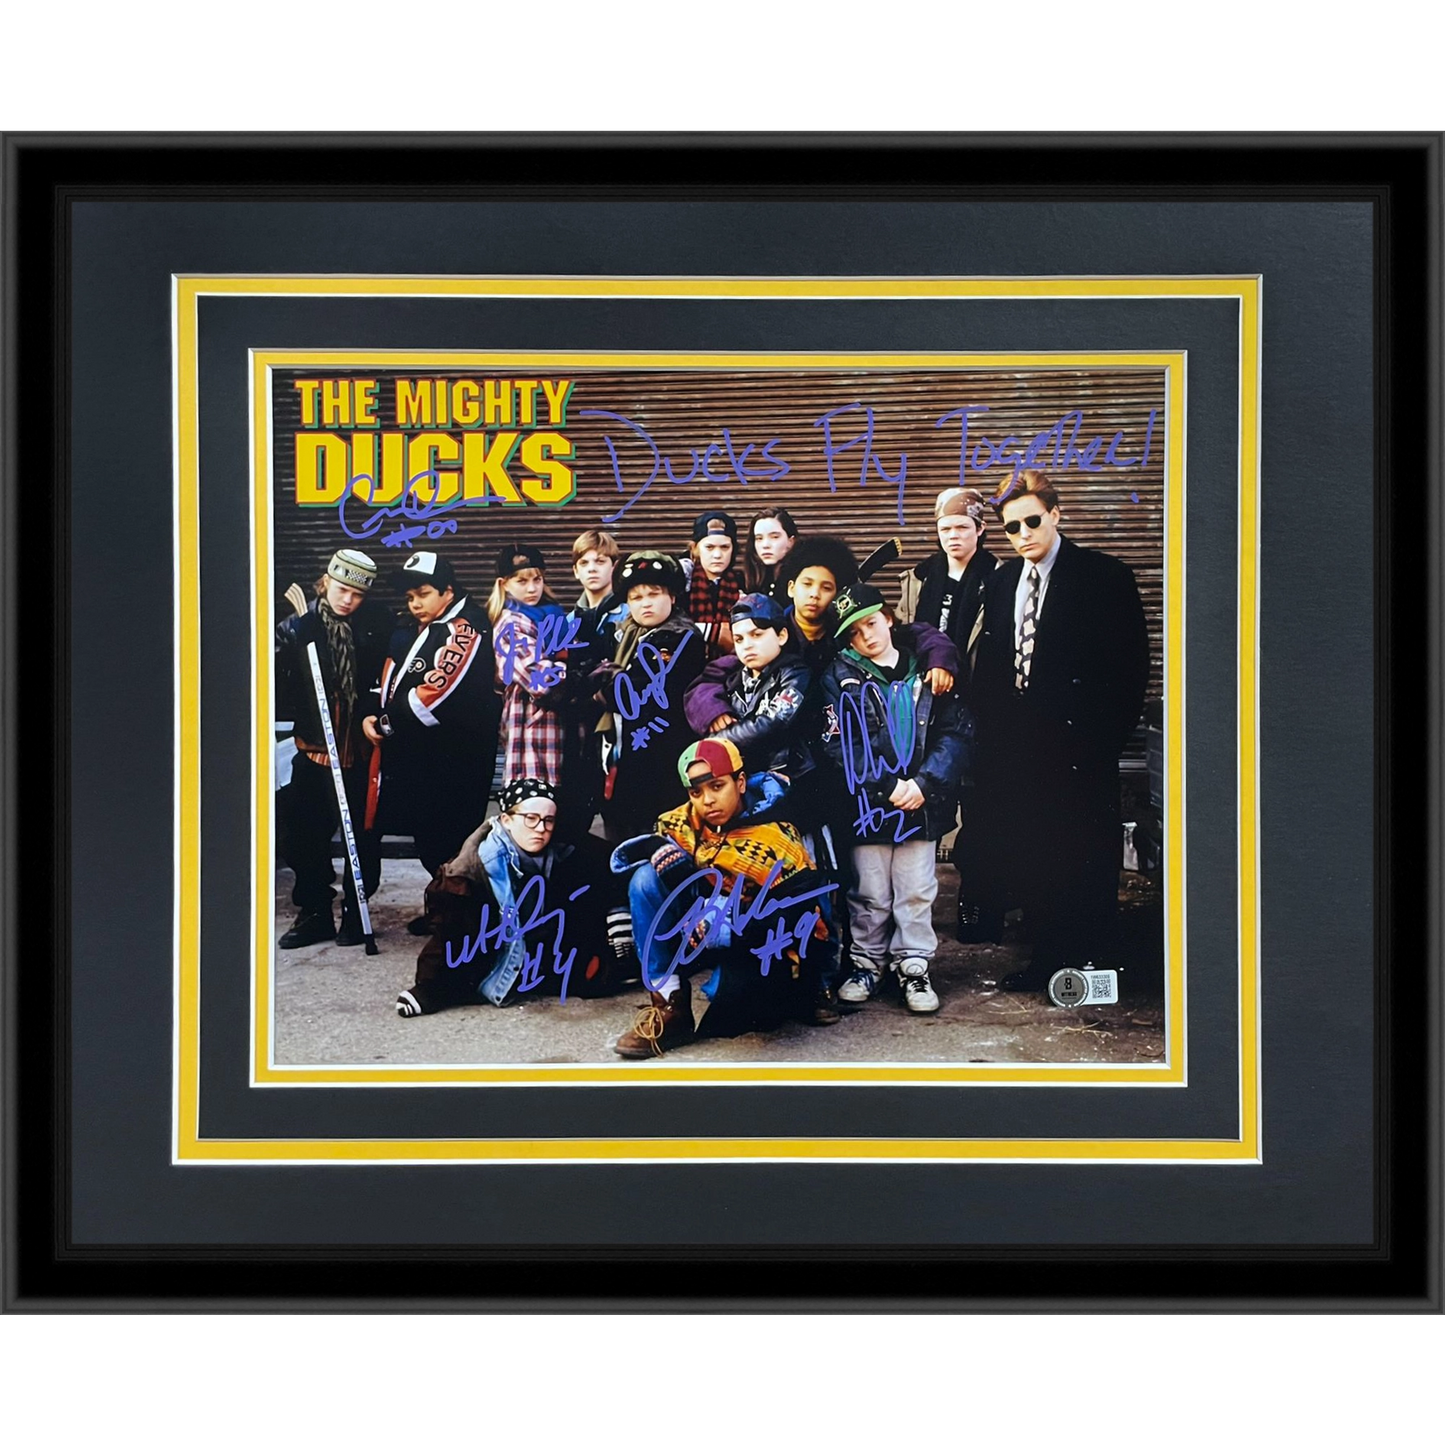 Mighty Ducks Cast Autographed 11x14 (Horiz) Deluxe Framed Movie Poster - 6 Signatures - Beckett